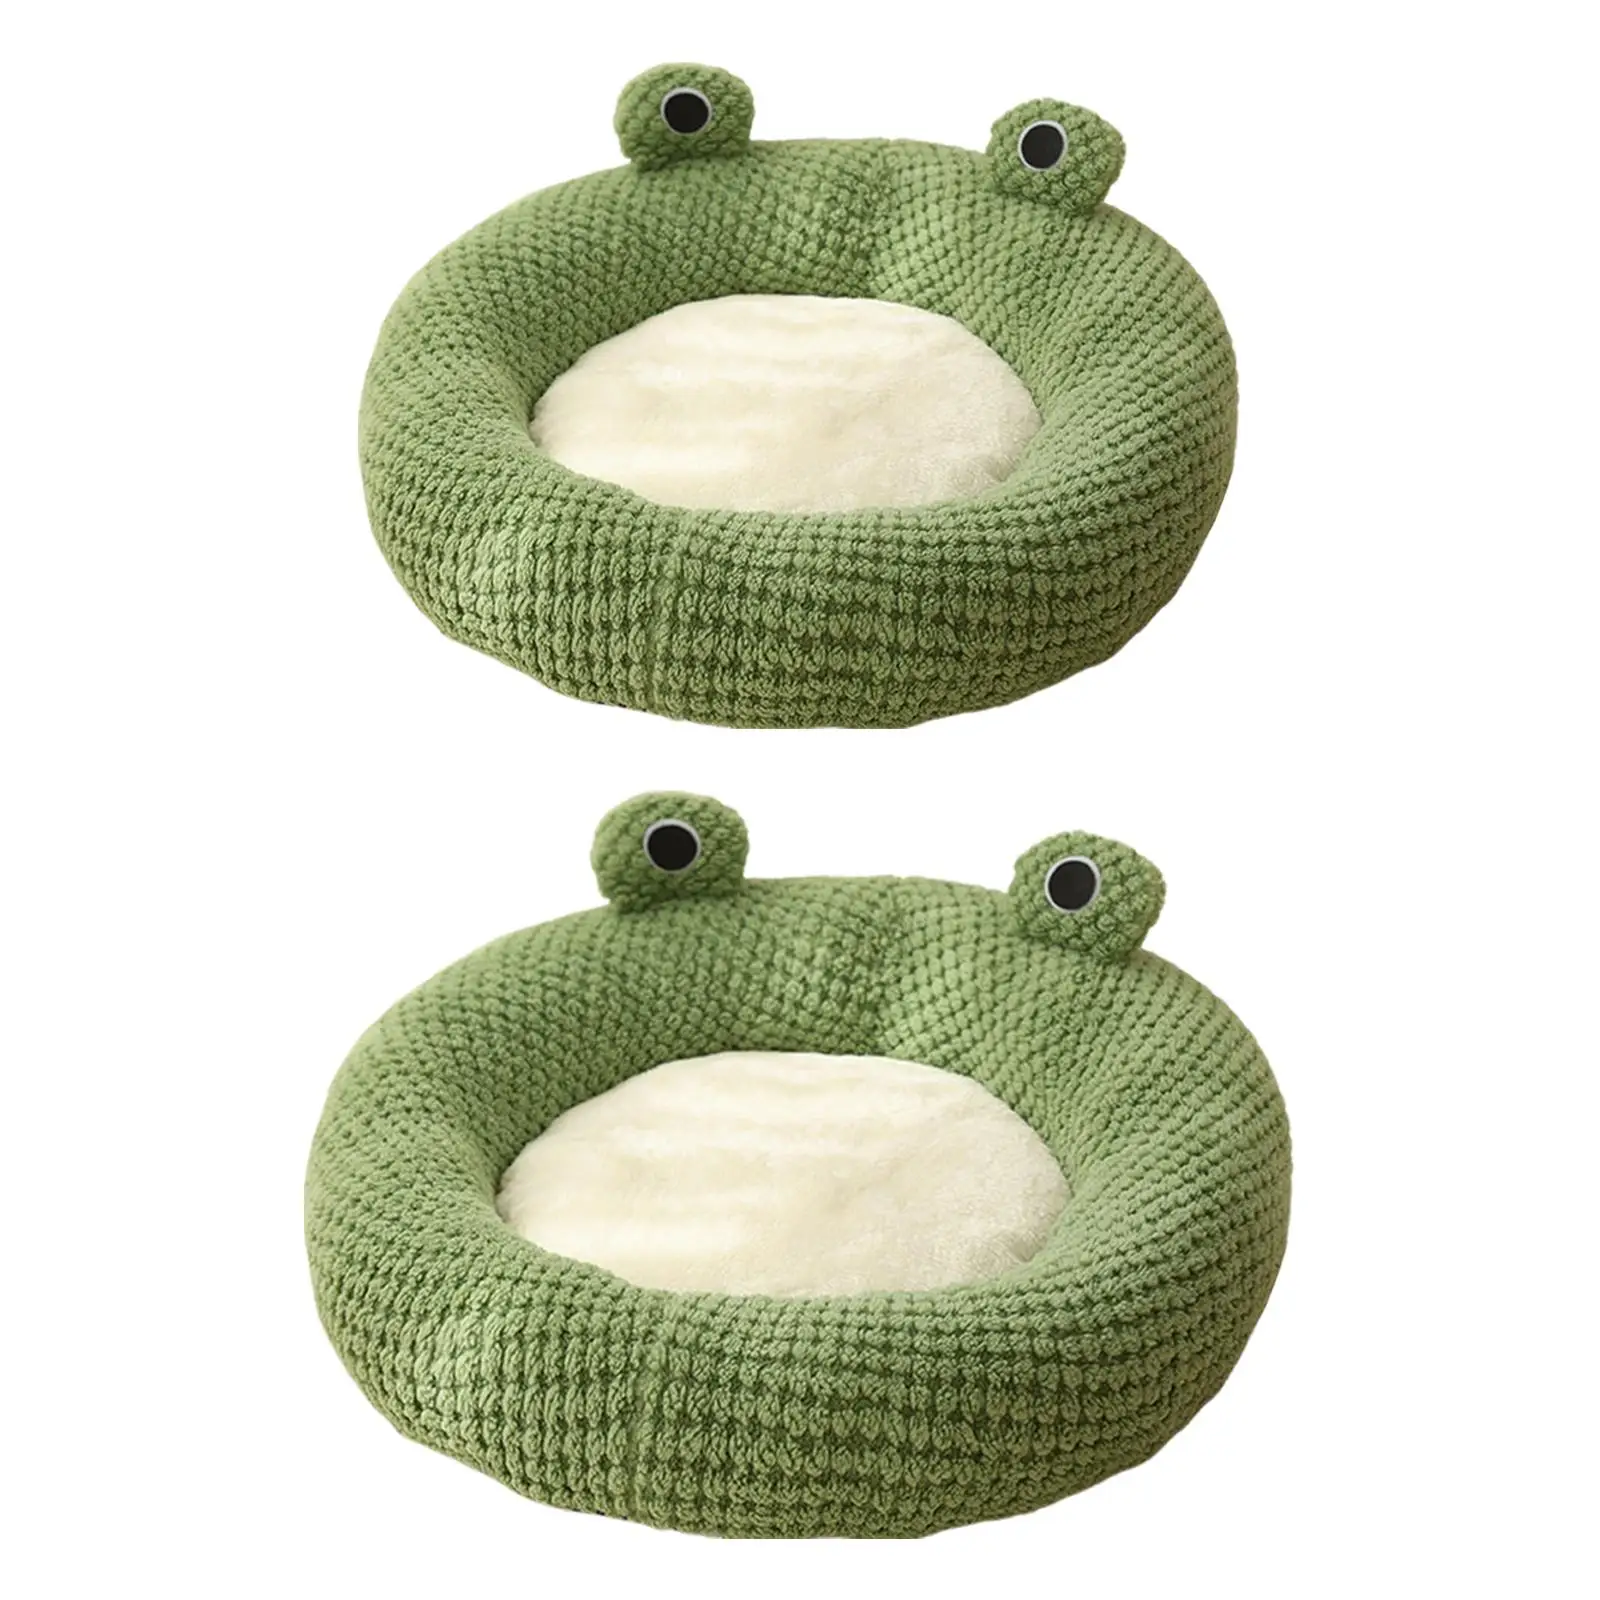 Cat Bed for Cats or Small Dogs Comfortable Calming Indoor Self Warming Cute Pet Cat Nest for Kitten Rabbit Cats Puppy